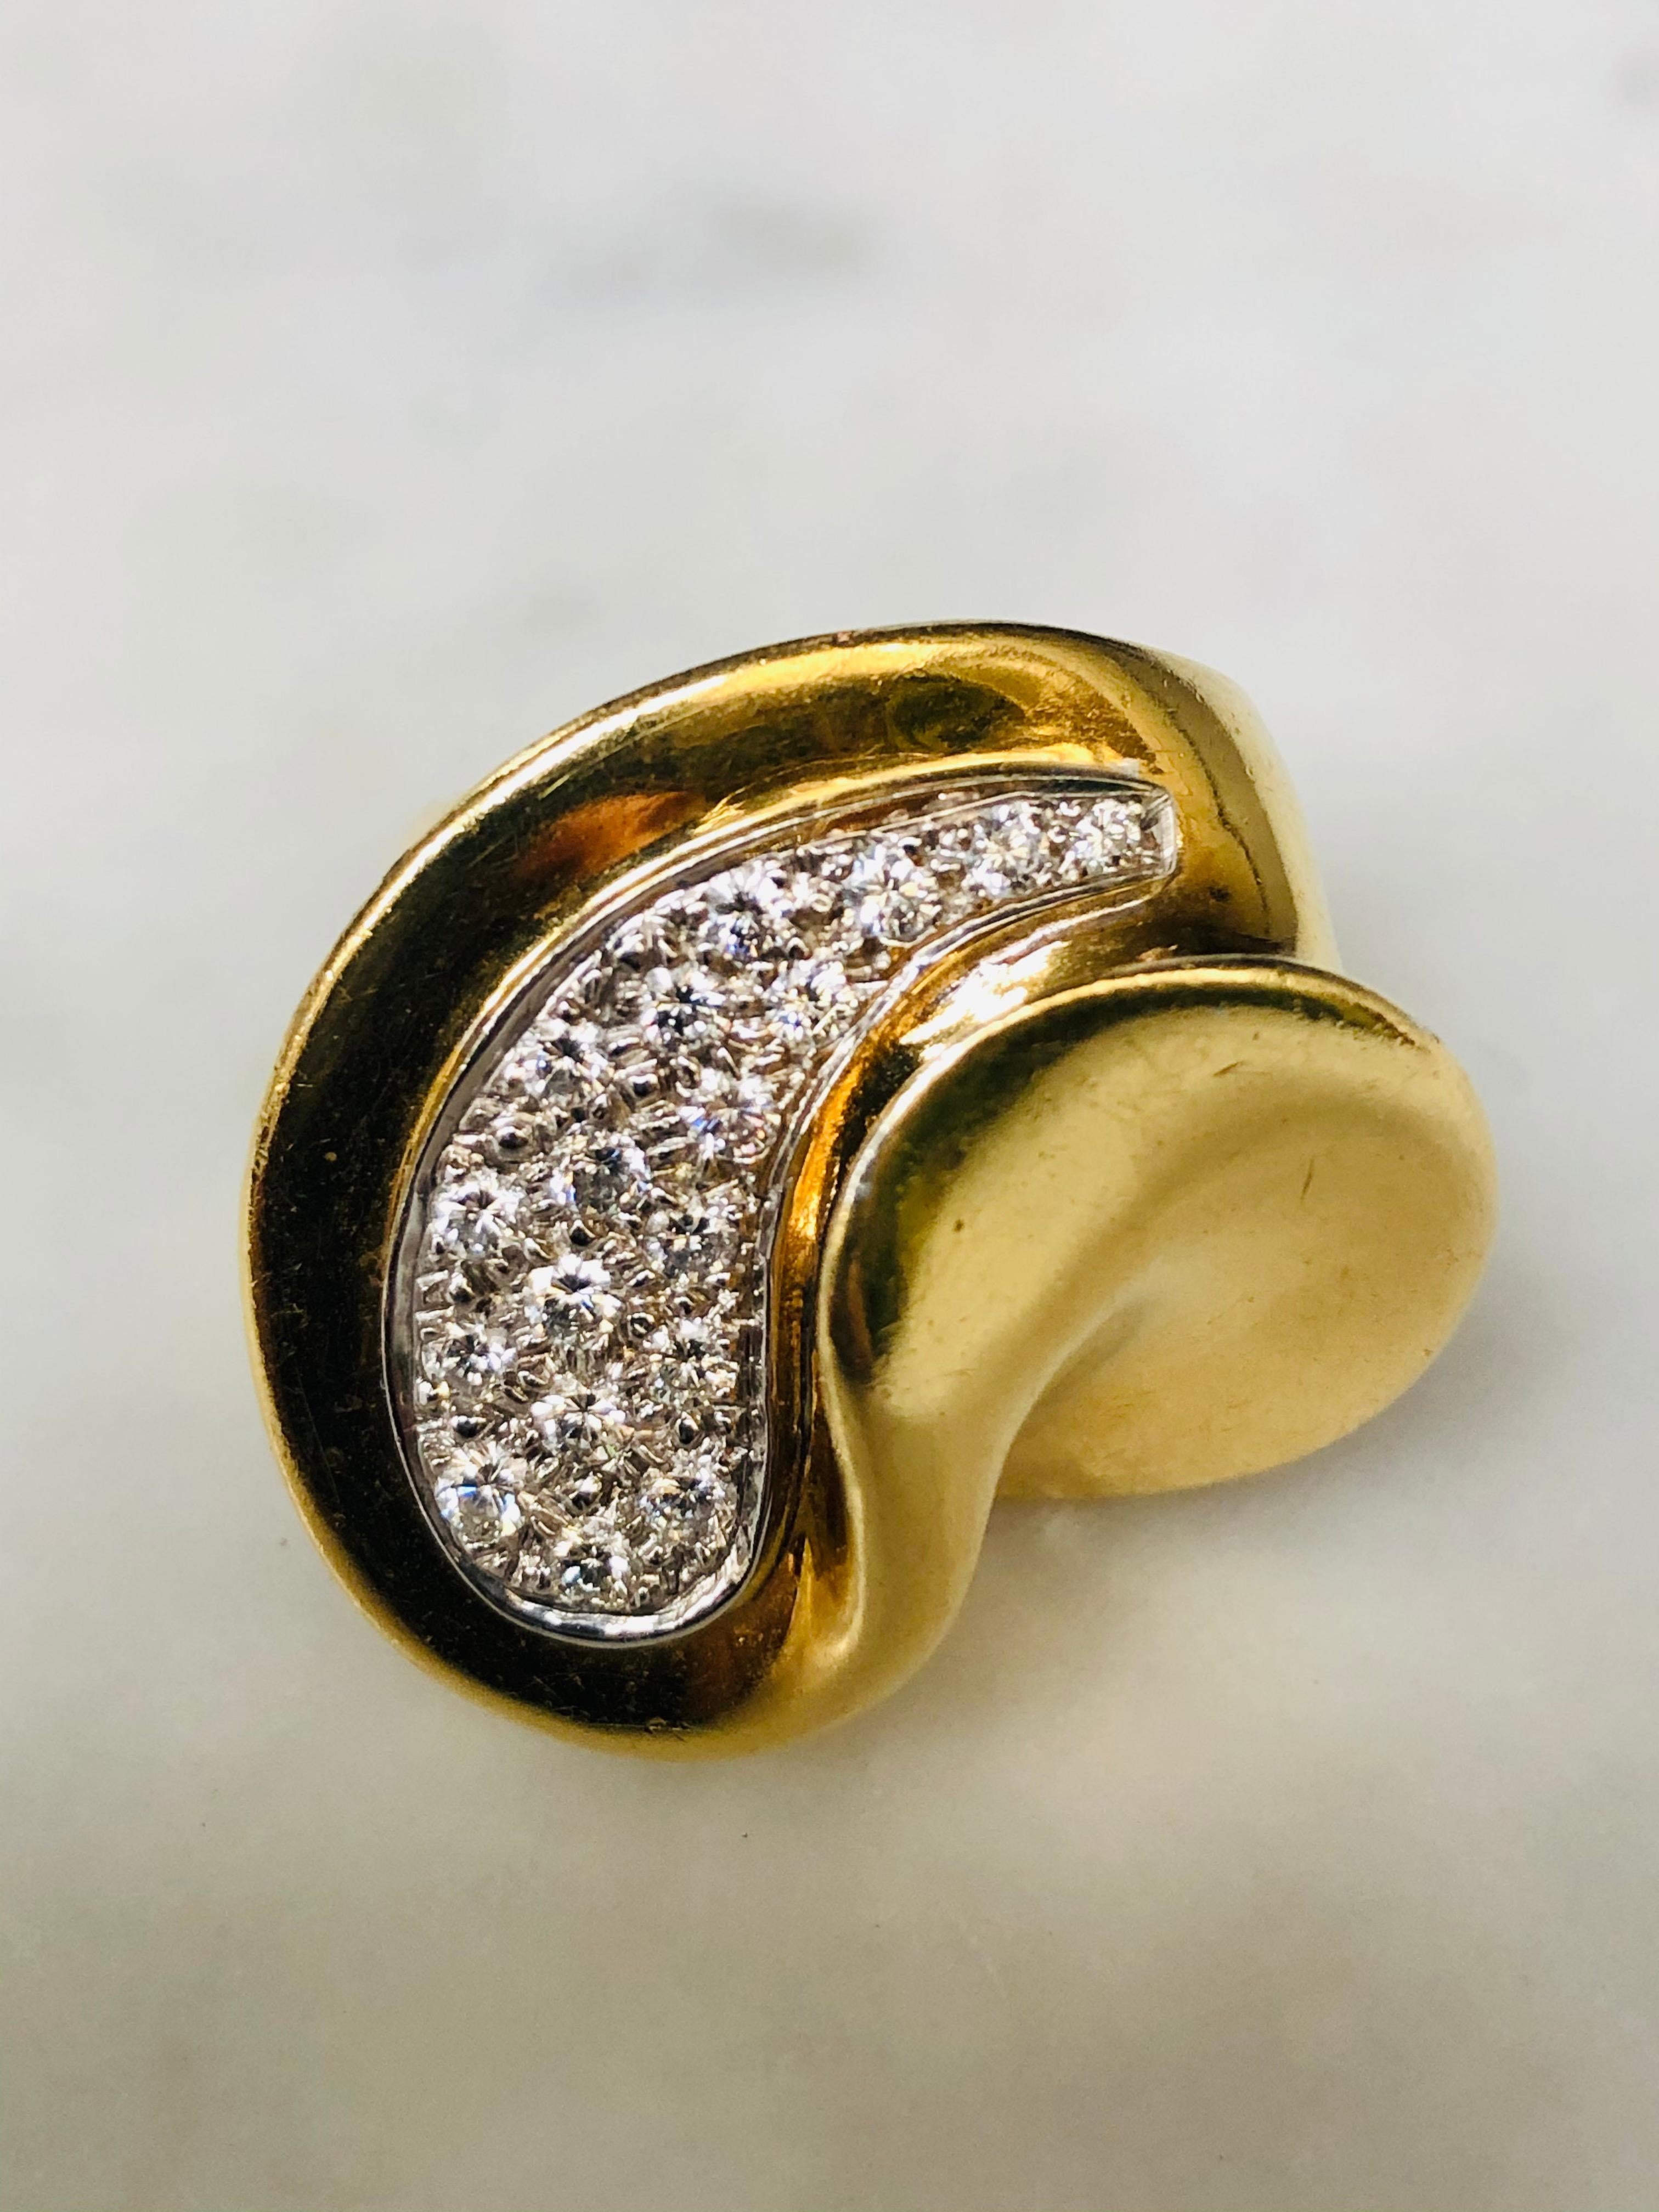 Large 18 carat Gold cocktail ring set with .80 carats of brilliant cut white diamonds. This sculptural ring has the credentials of an ‘Art Jewel’ with an Italian vibe. Italian diamond & yellow gold cuff bangle to complete the look available.

Weight